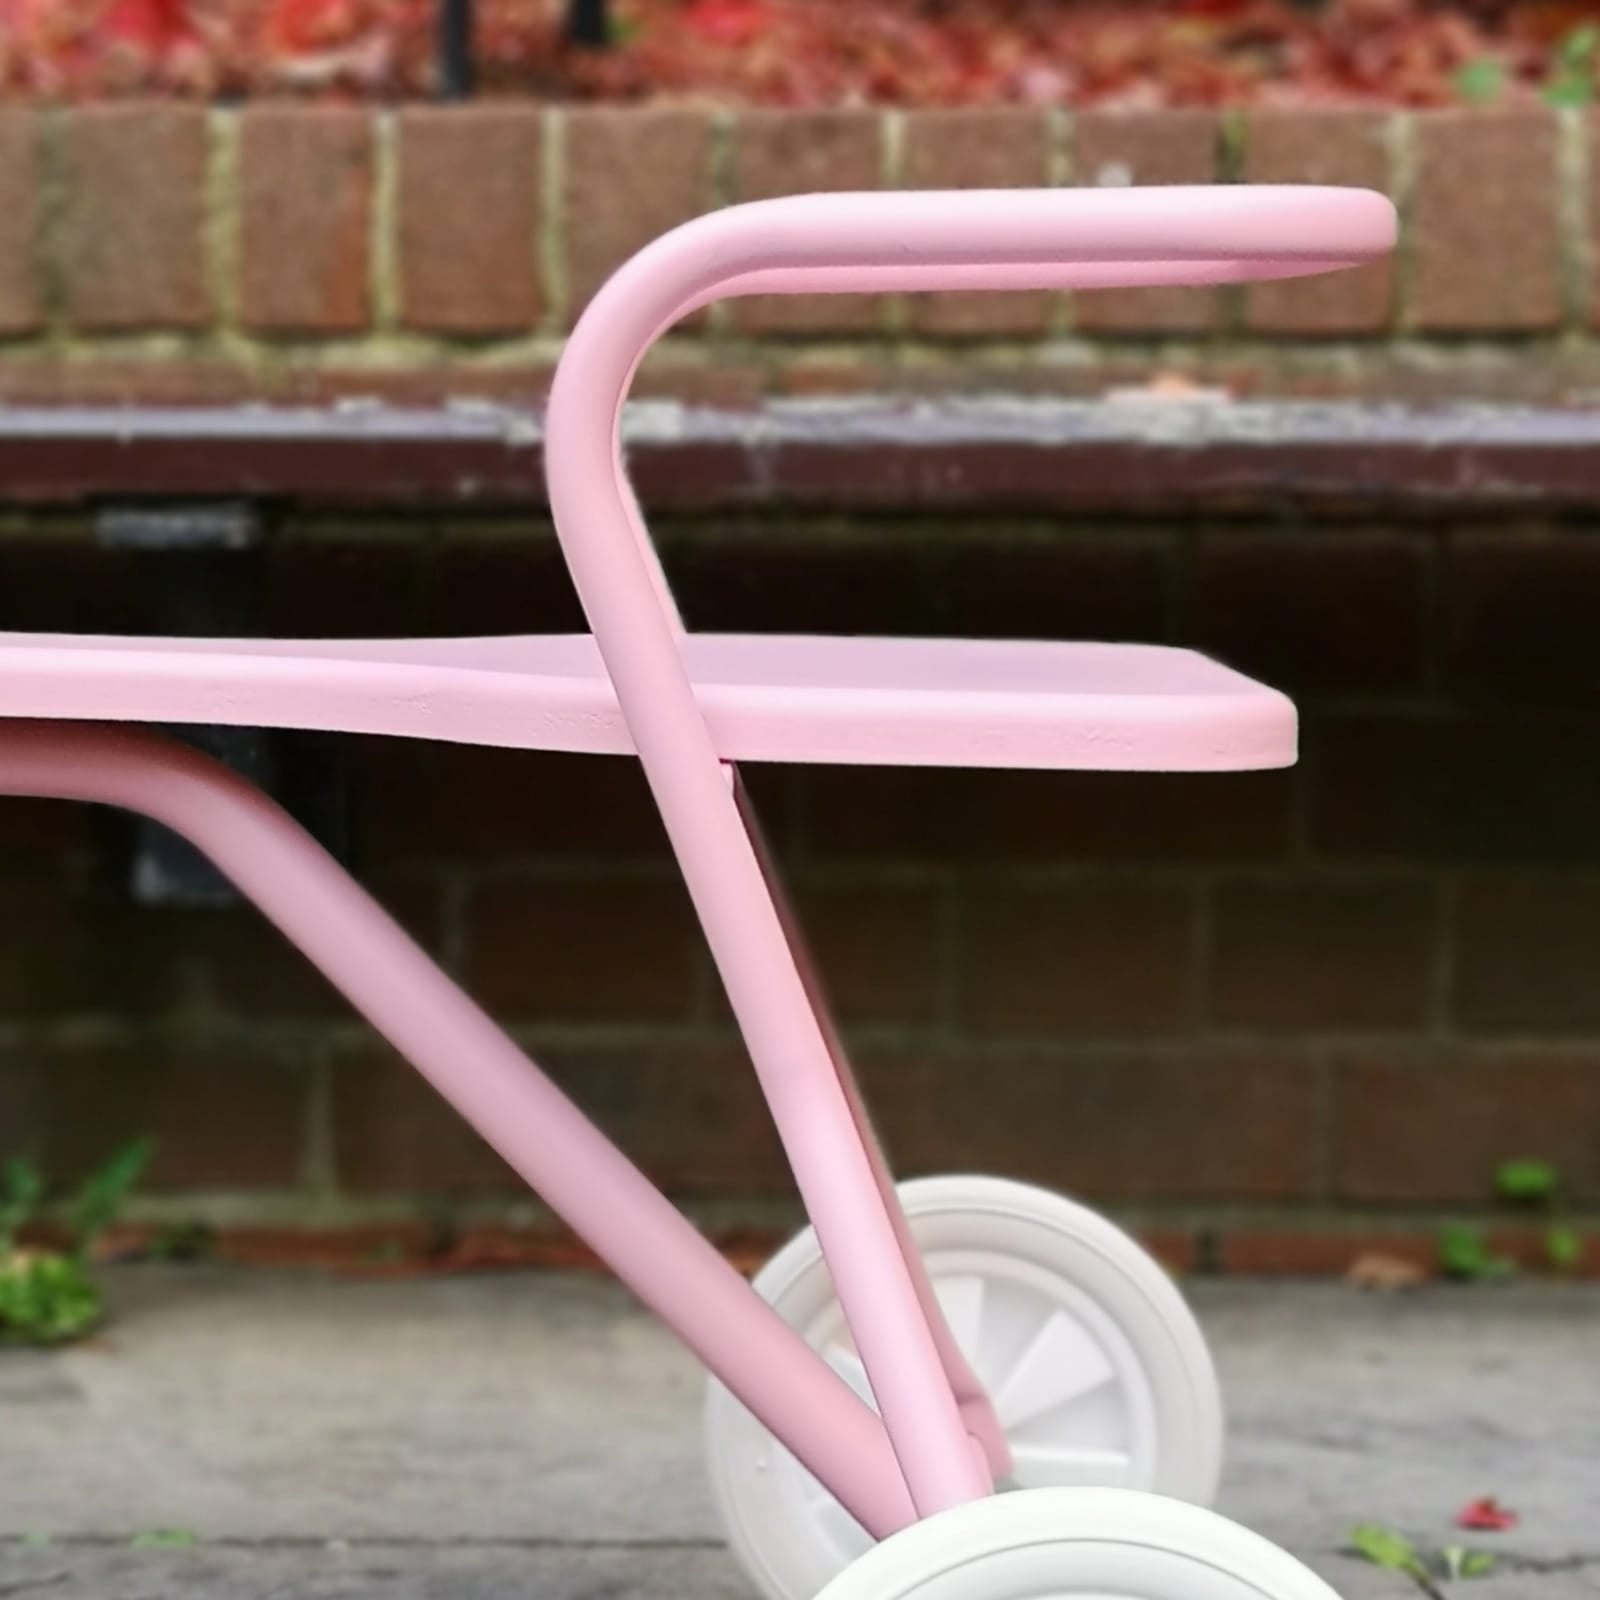 Foxrider Tricycle pink.